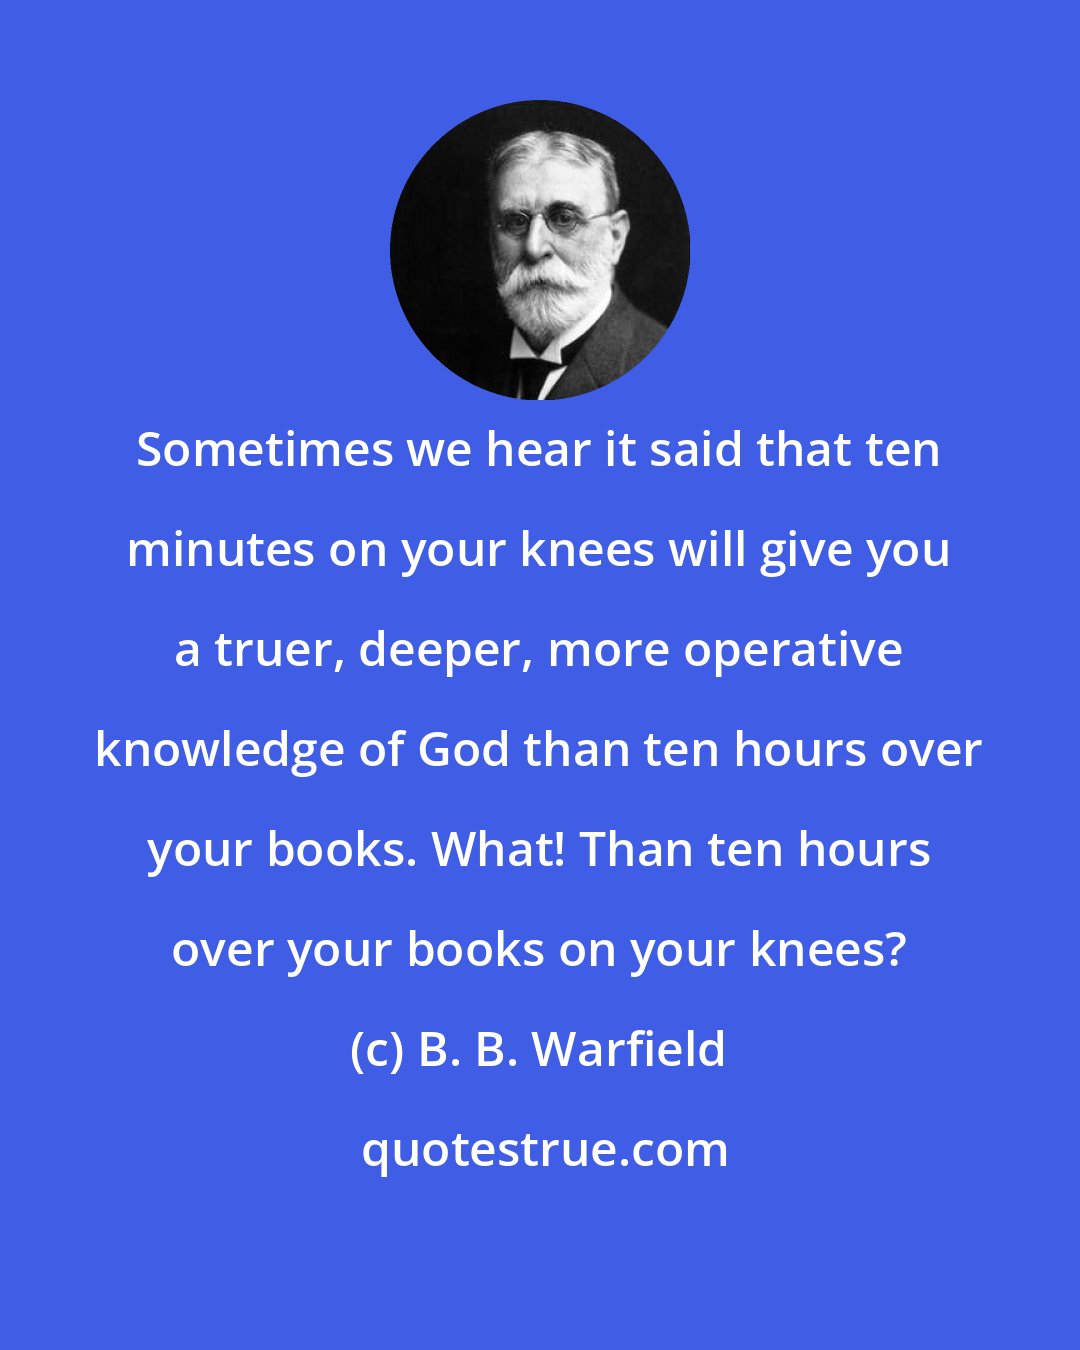 B. B. Warfield: Sometimes we hear it said that ten minutes on your knees will give you a truer, deeper, more operative knowledge of God than ten hours over your books. What! Than ten hours over your books on your knees?